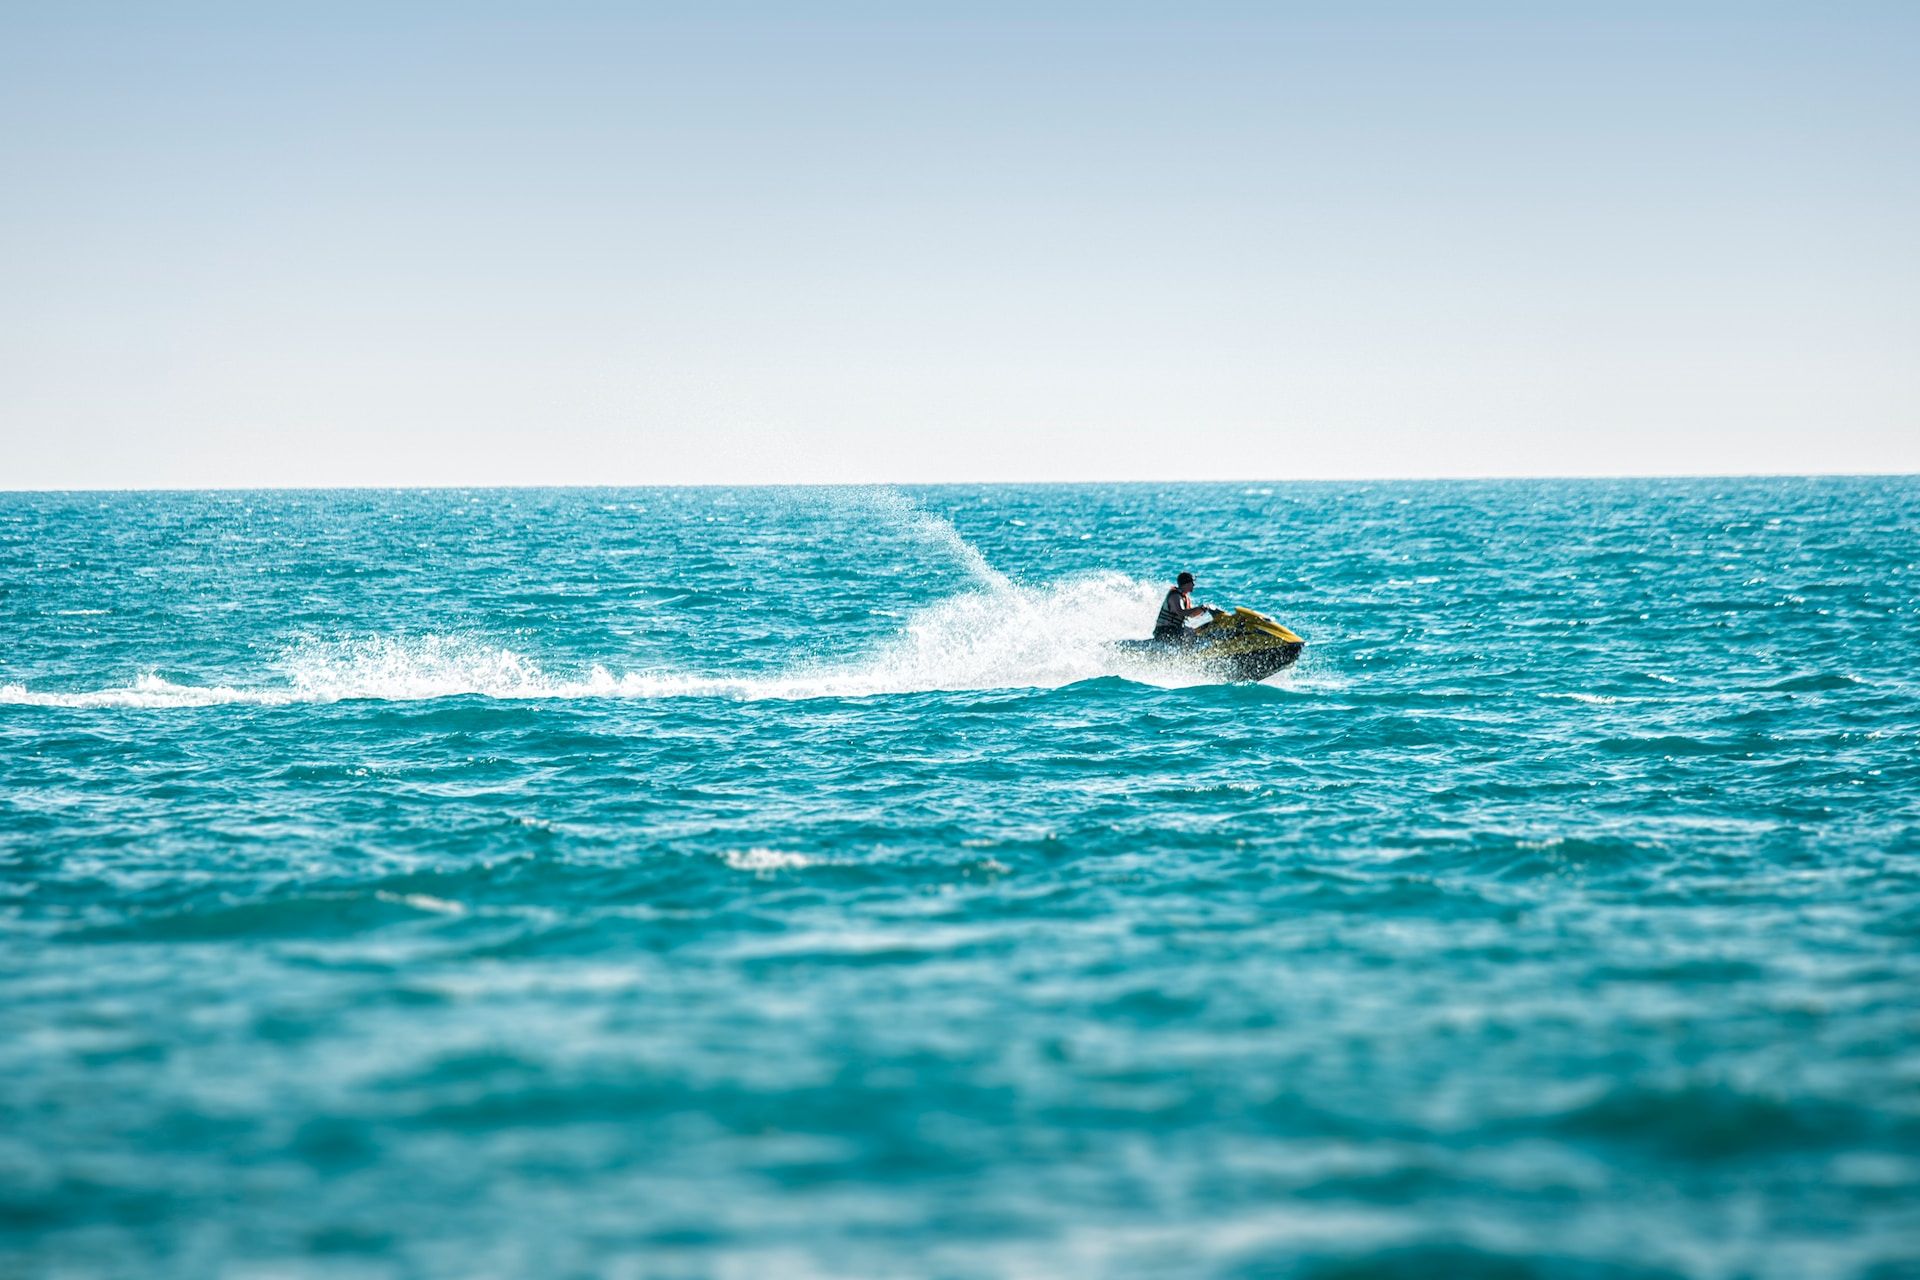 Jet skier taking to the waves on clear blue water 